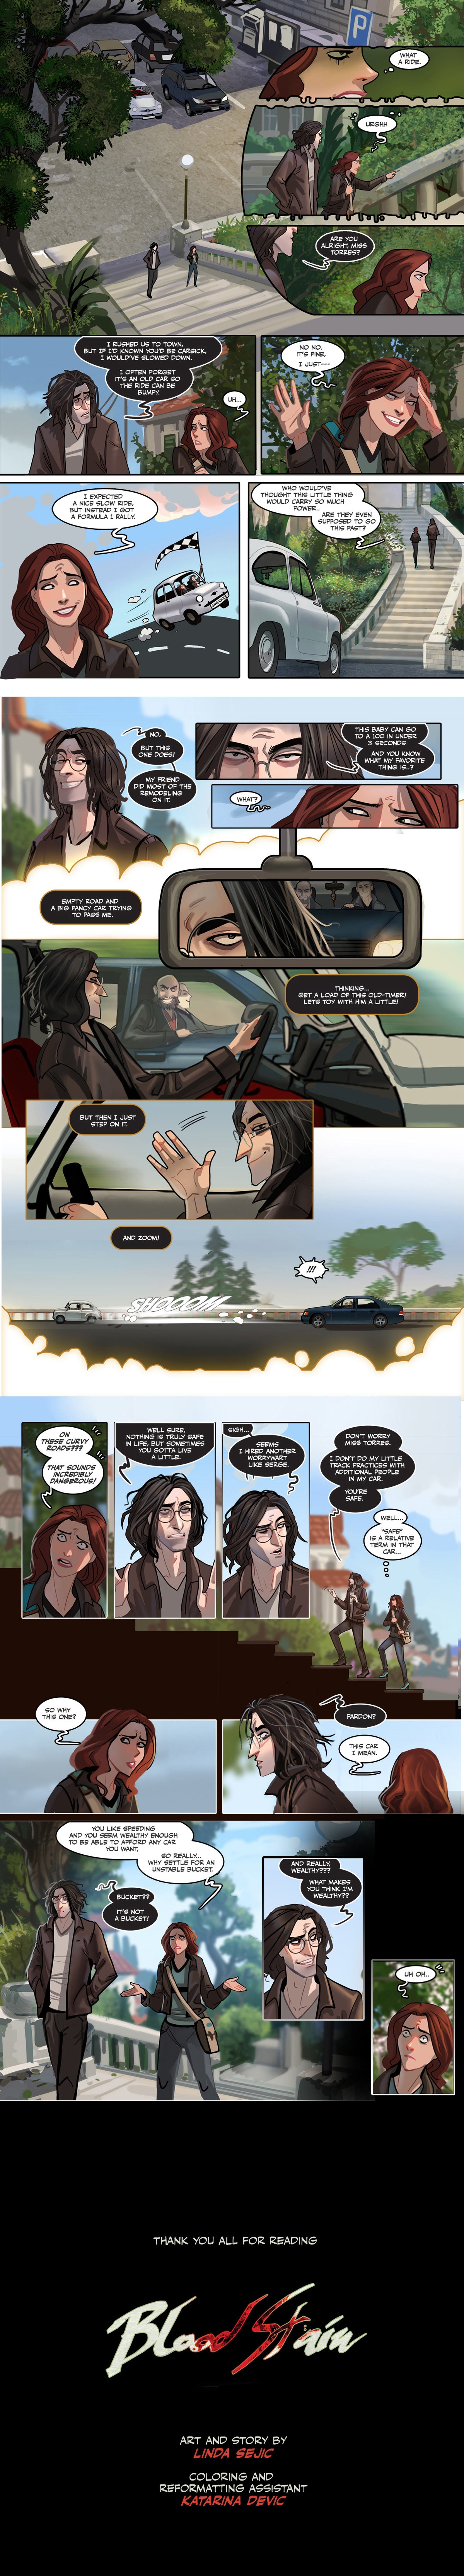 Blood Stain ch. 4 (ongoing) [Linda Sejic / Sigeel] 10